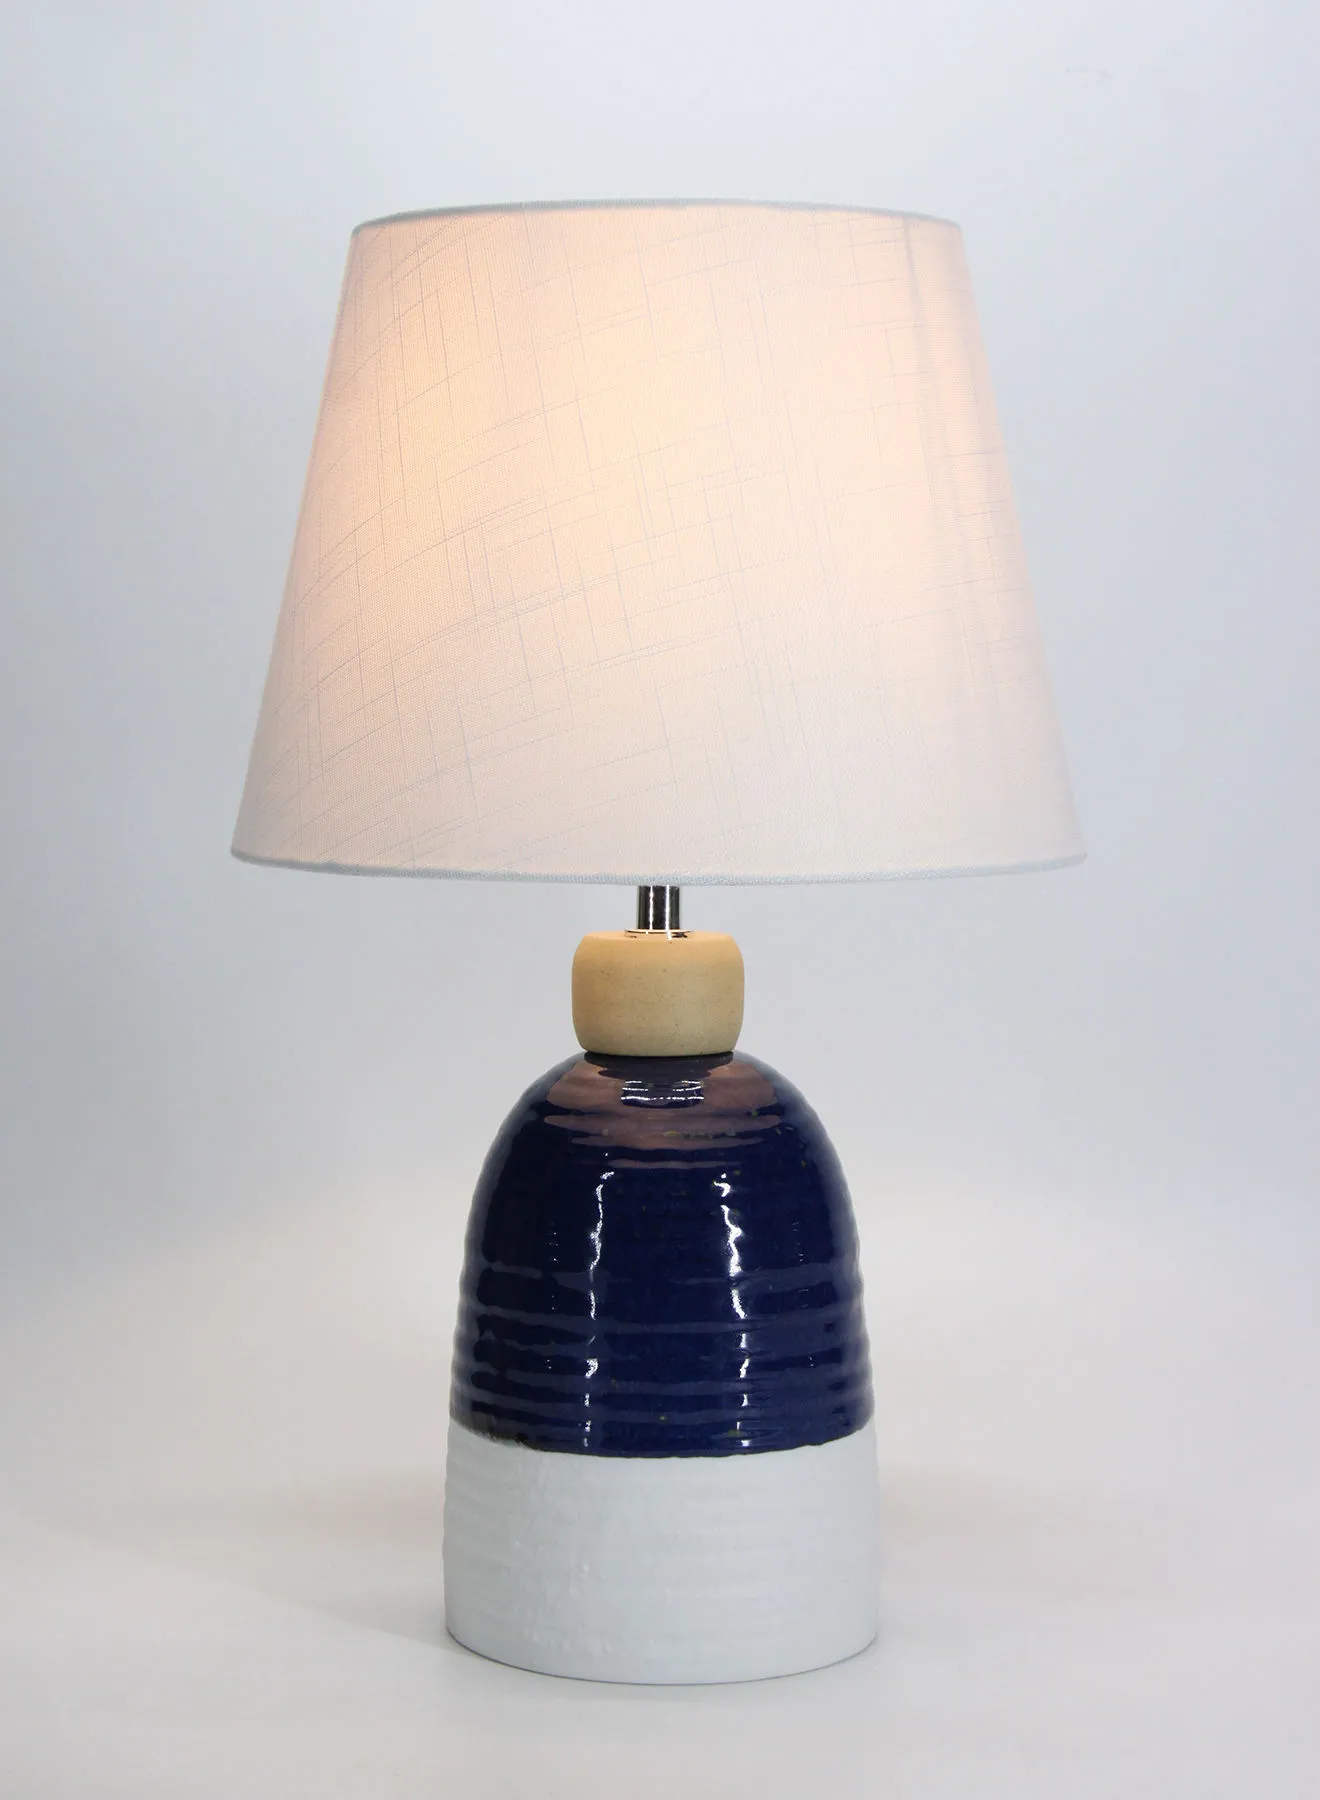 Switch Port Ceramic Table Lamp | Lampshade Unique Luxury Quality Material for the Perfect Stylish Home D192-93 Blue 30 x 30 x 49 Blue 30 x 30 x 49cm